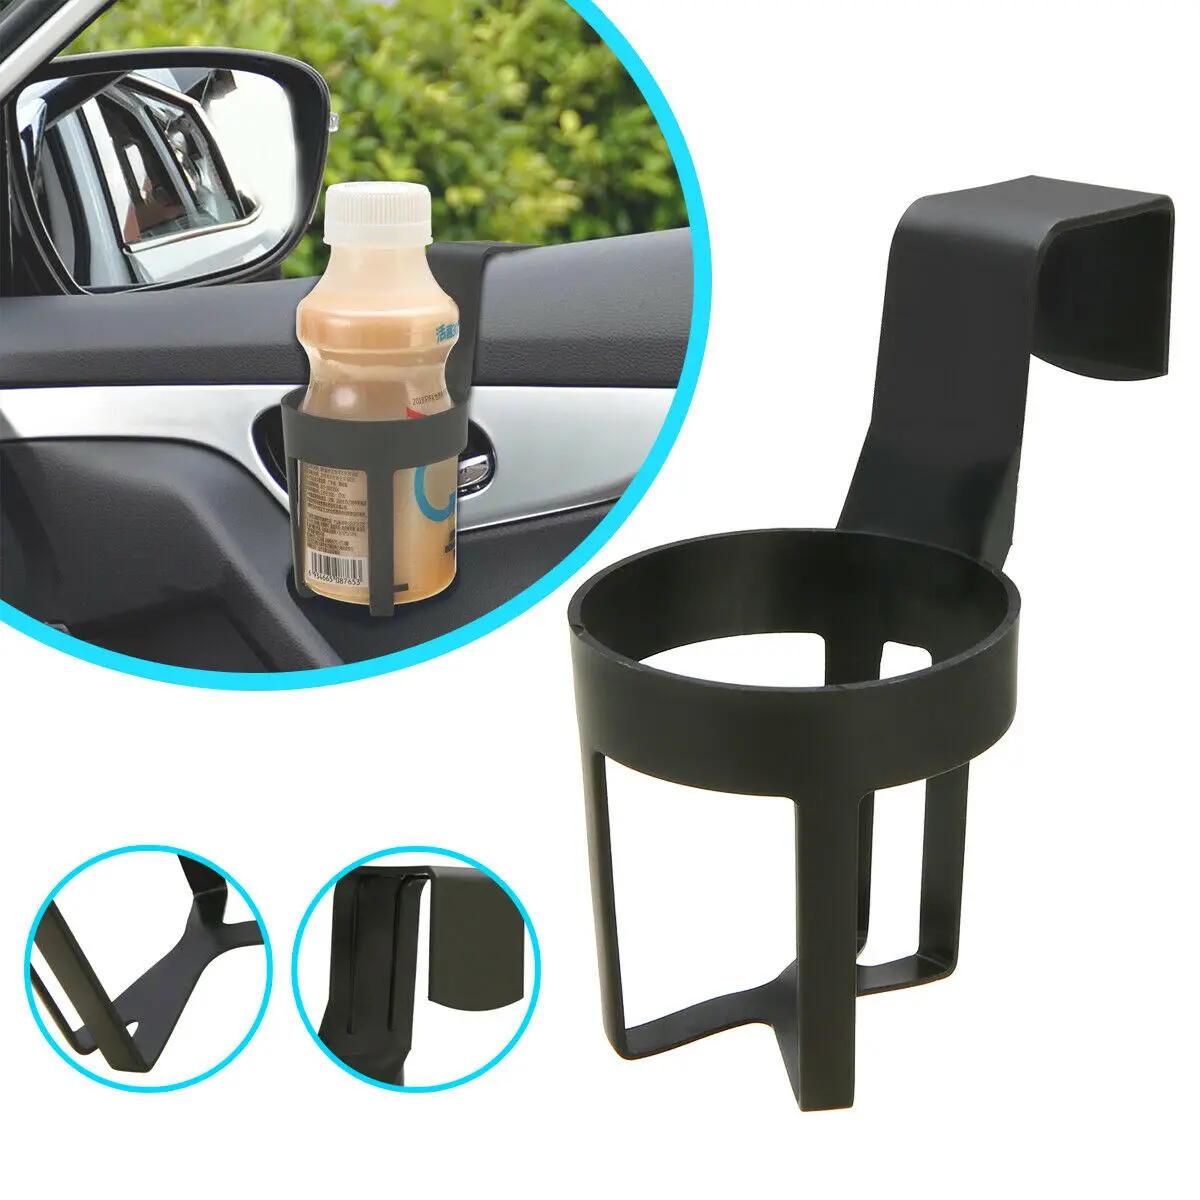 Universal Simple Car Vehicle Beverage Bottle Can Drink Cup Holder Stand Clip Shelf for Car Truck Automotive Vehicle Car Water cup holder